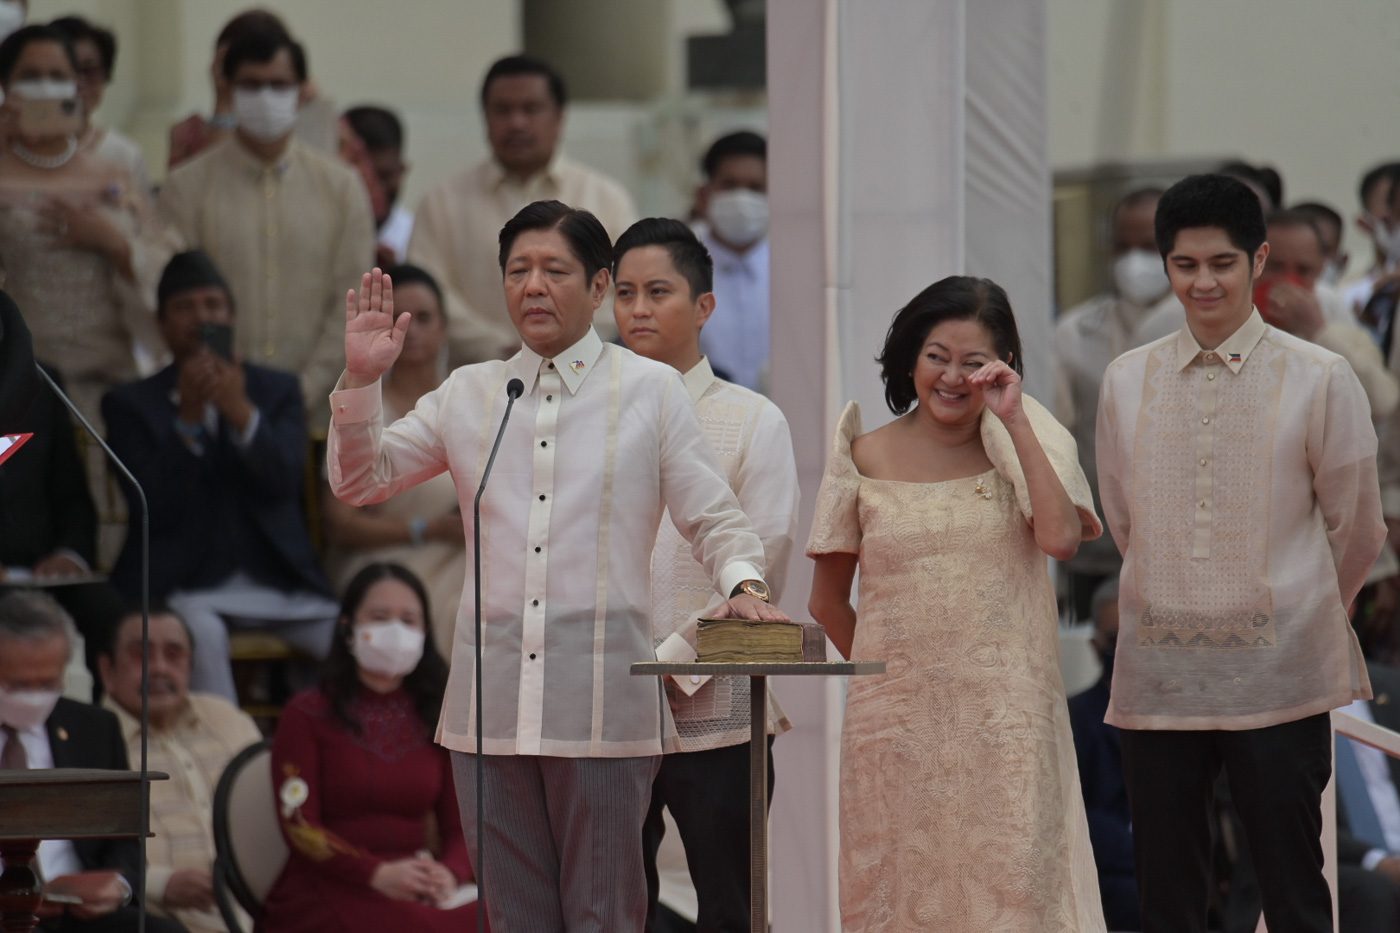 Enough to govern? Second Marcos president puts his ‘faith in the Filipino’